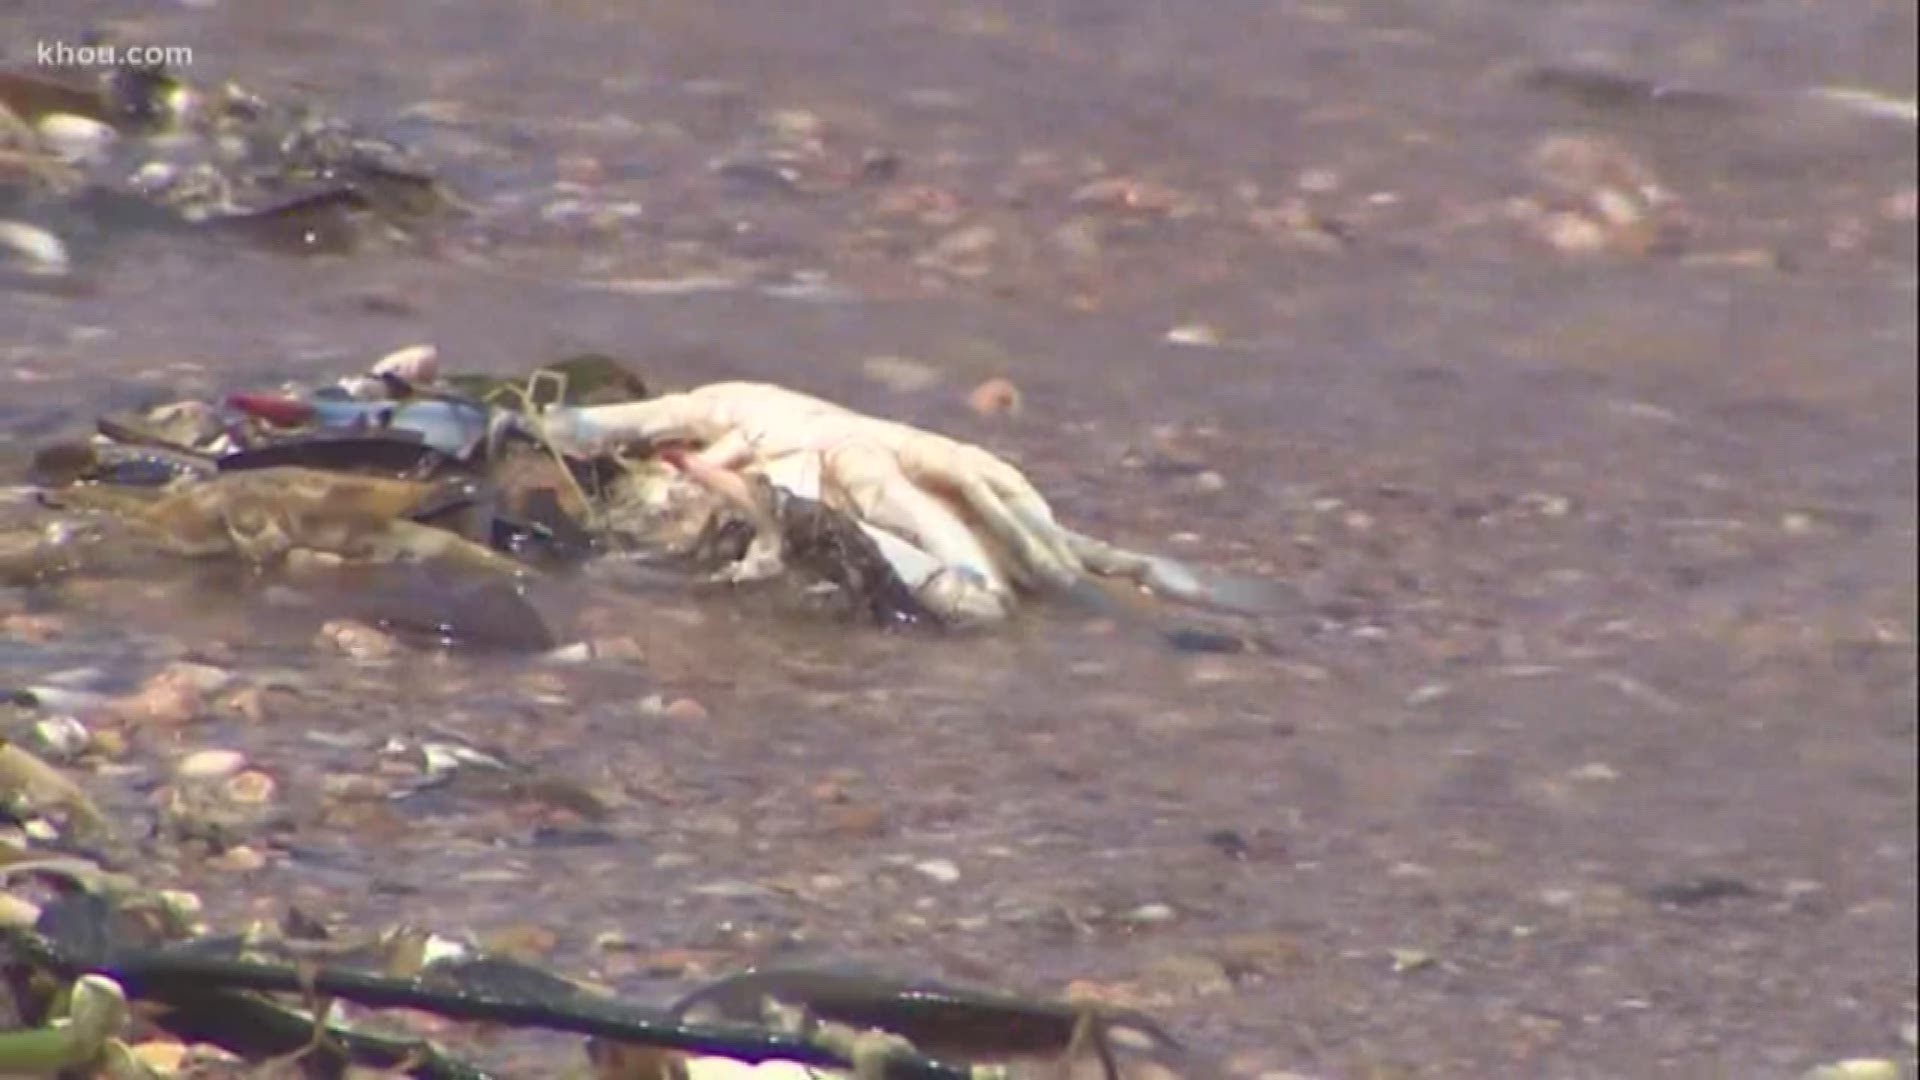 The Galveston Bay Foundation reports it has recovered about 1,000 dead fish and crab along the shoreline of its bayfront property in Kemah.